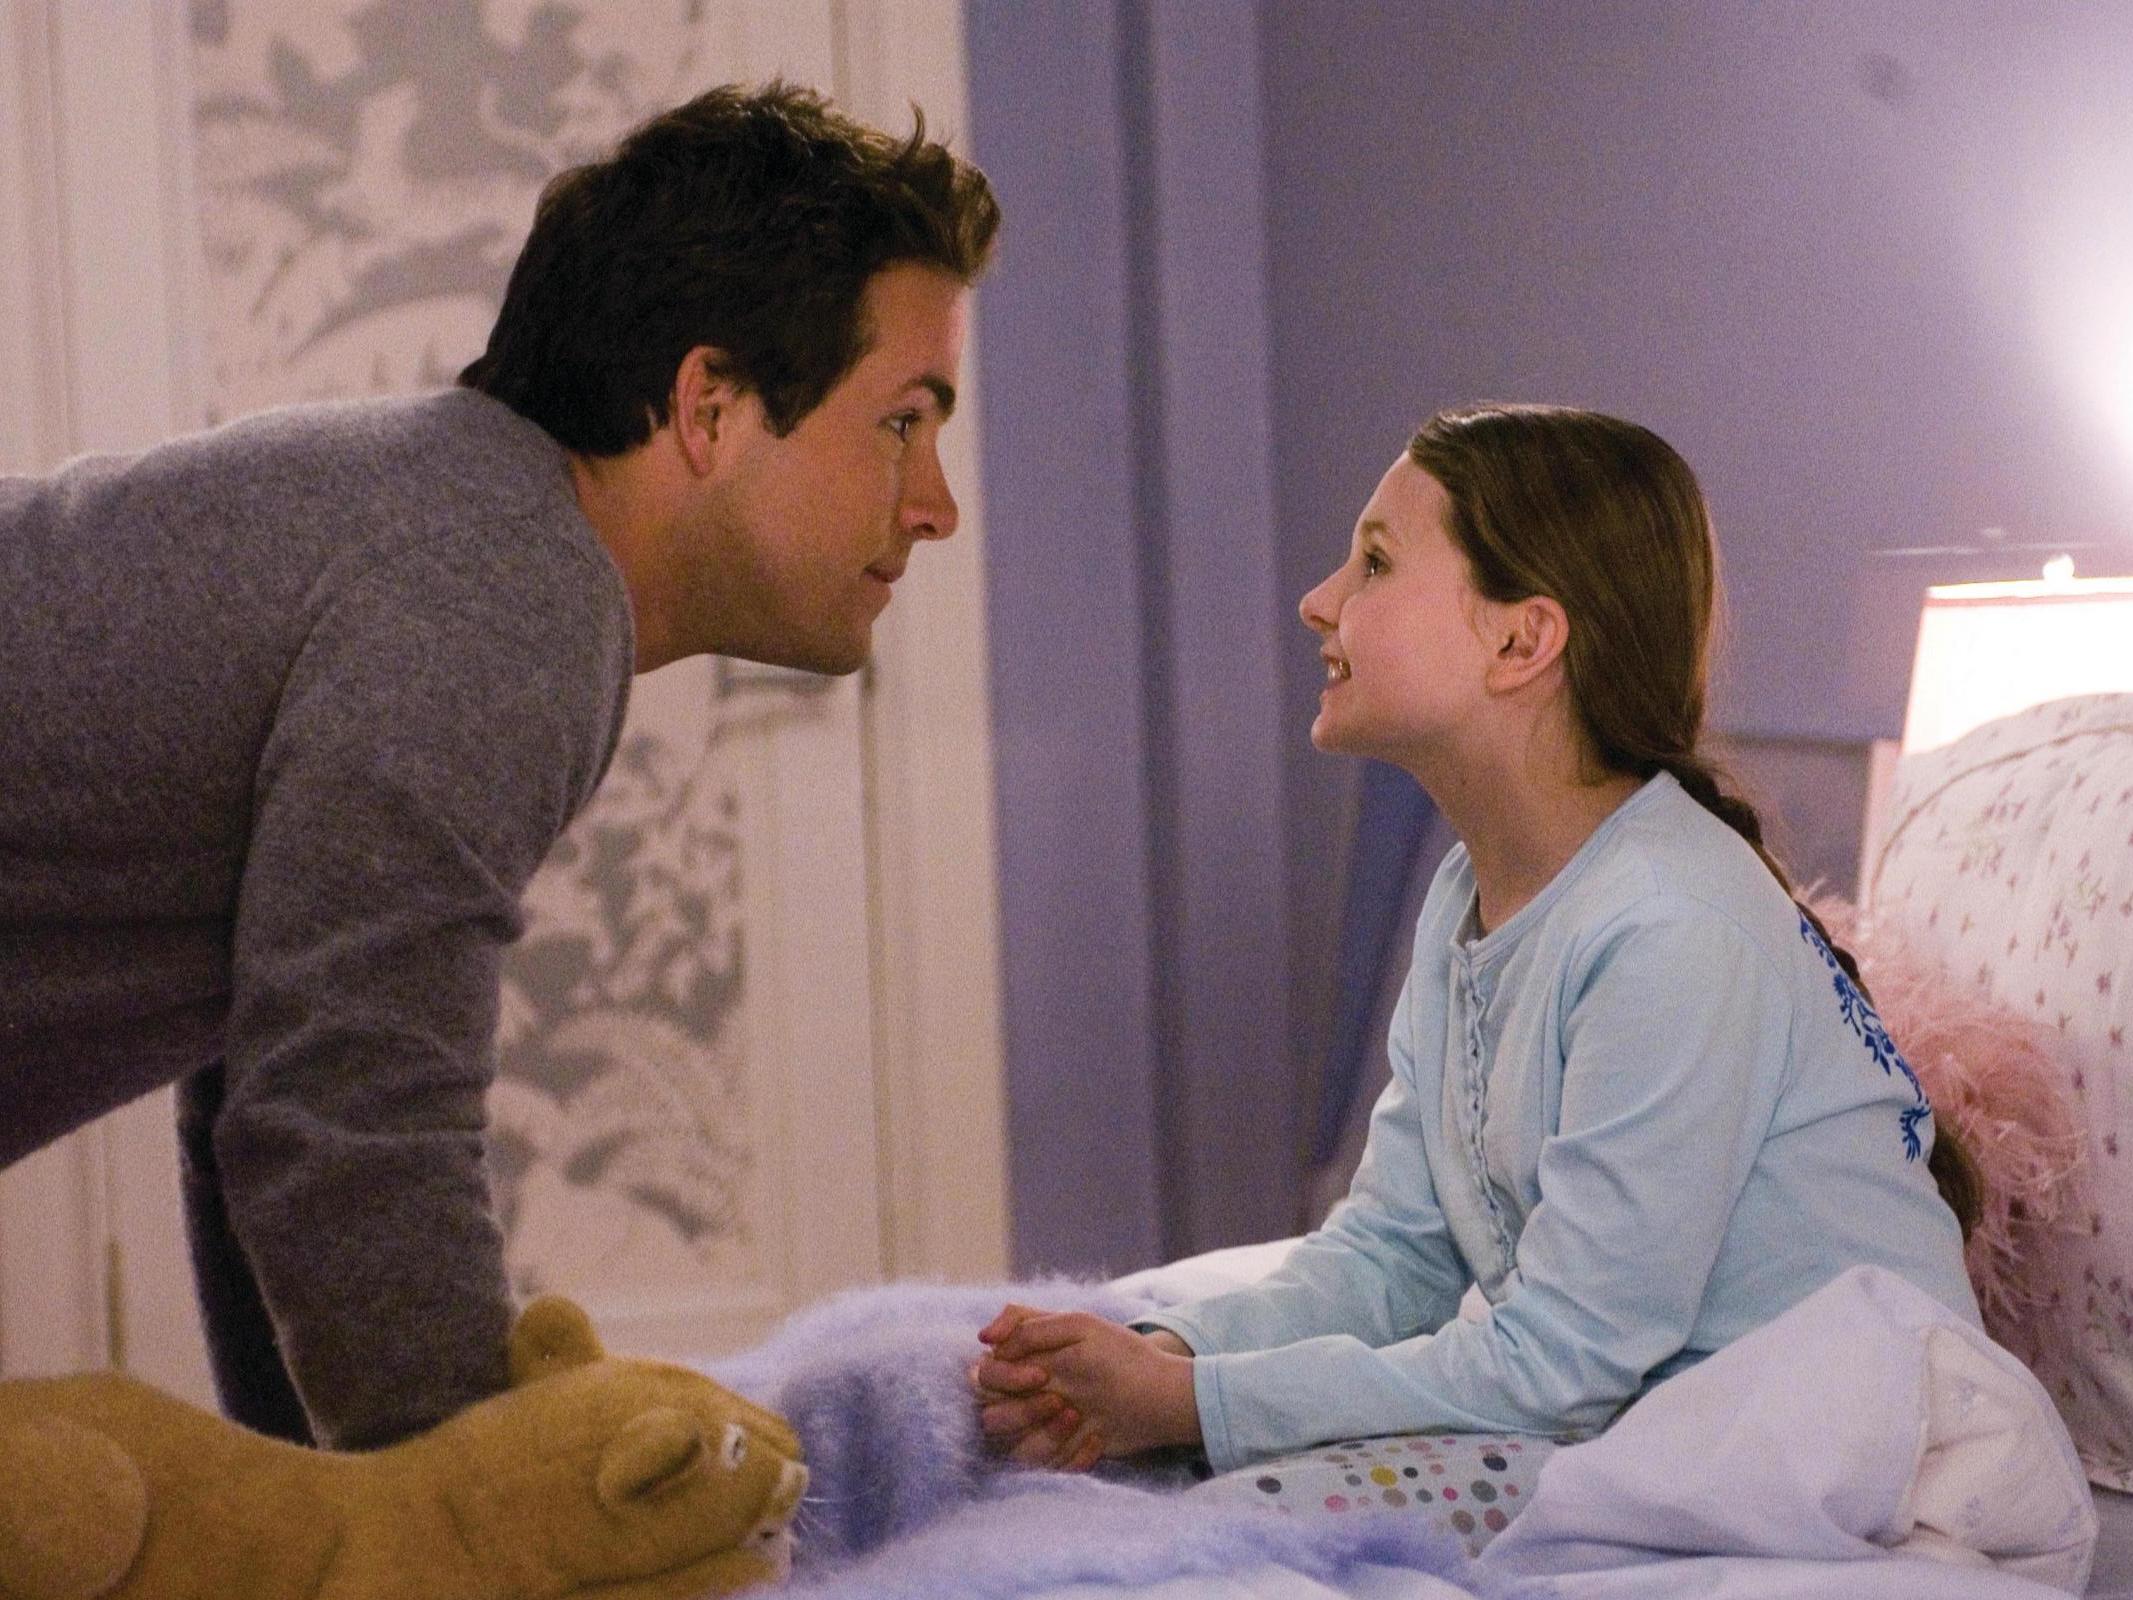 Ryan Reynolds and Abigail Breslin in 'Definitely, Maybe', 2008, distributed by Universal Studios